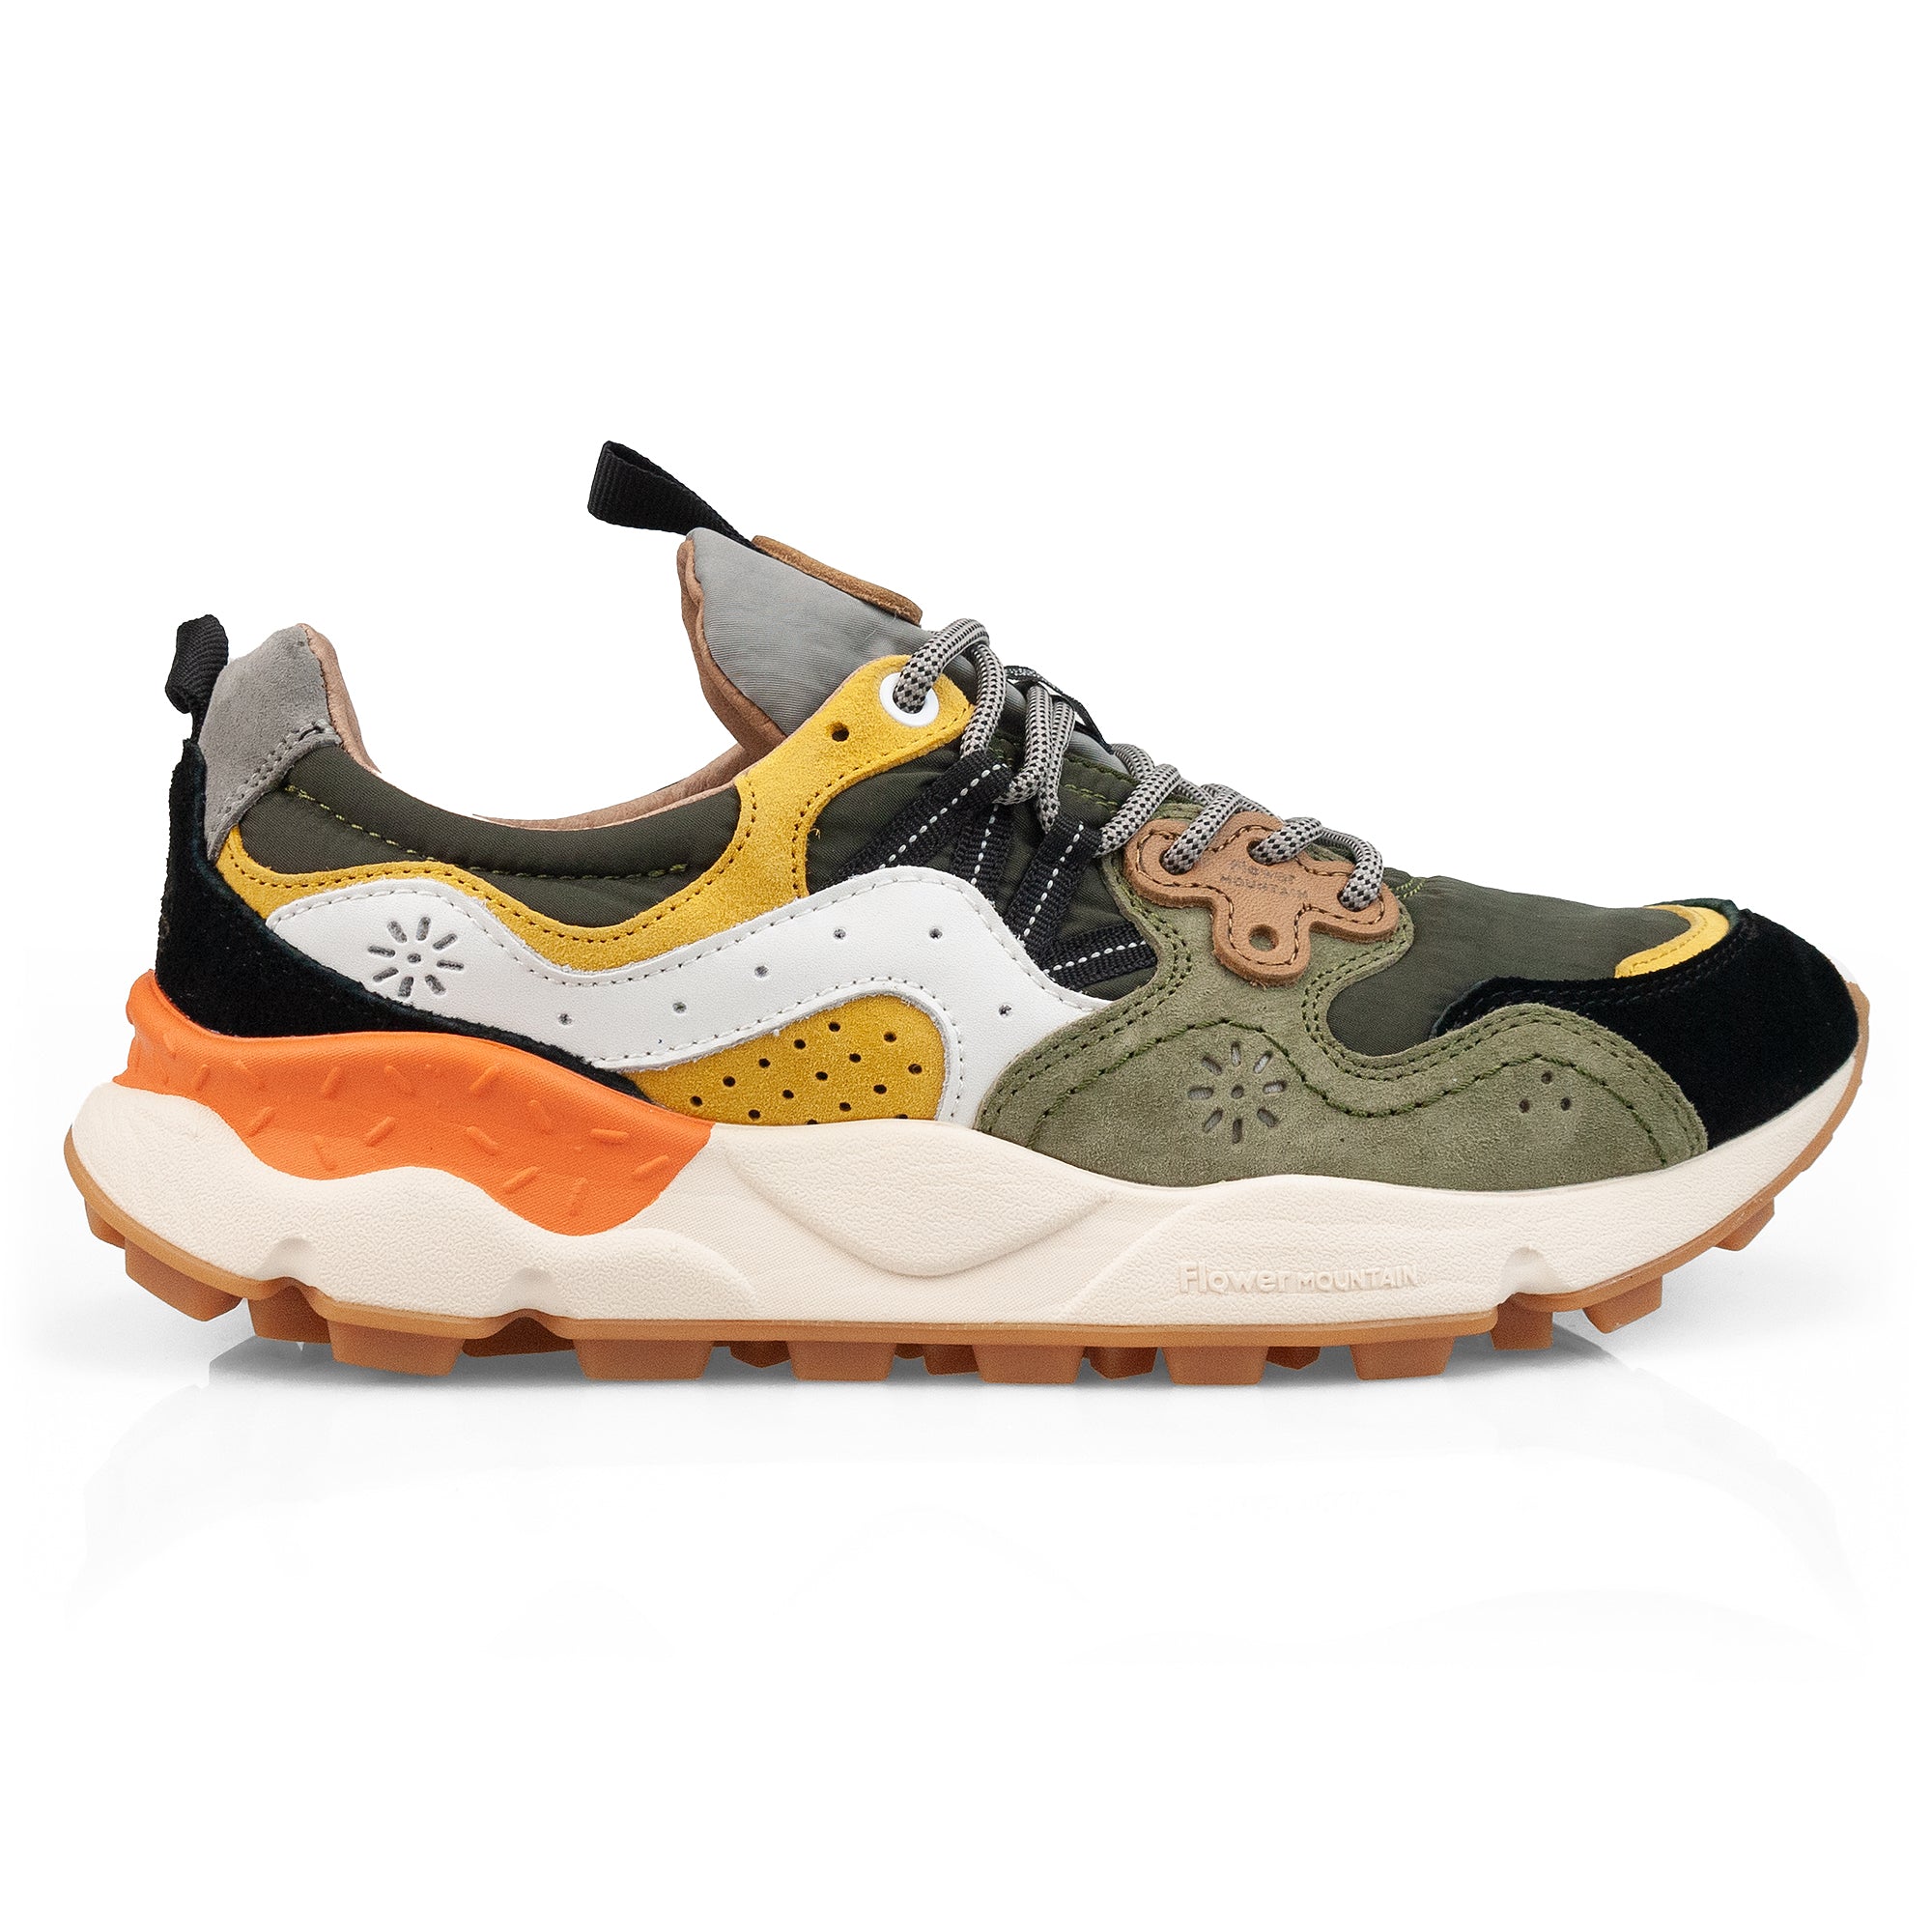 Flower Mountain Yamano 3 Trainers - Military/Brown